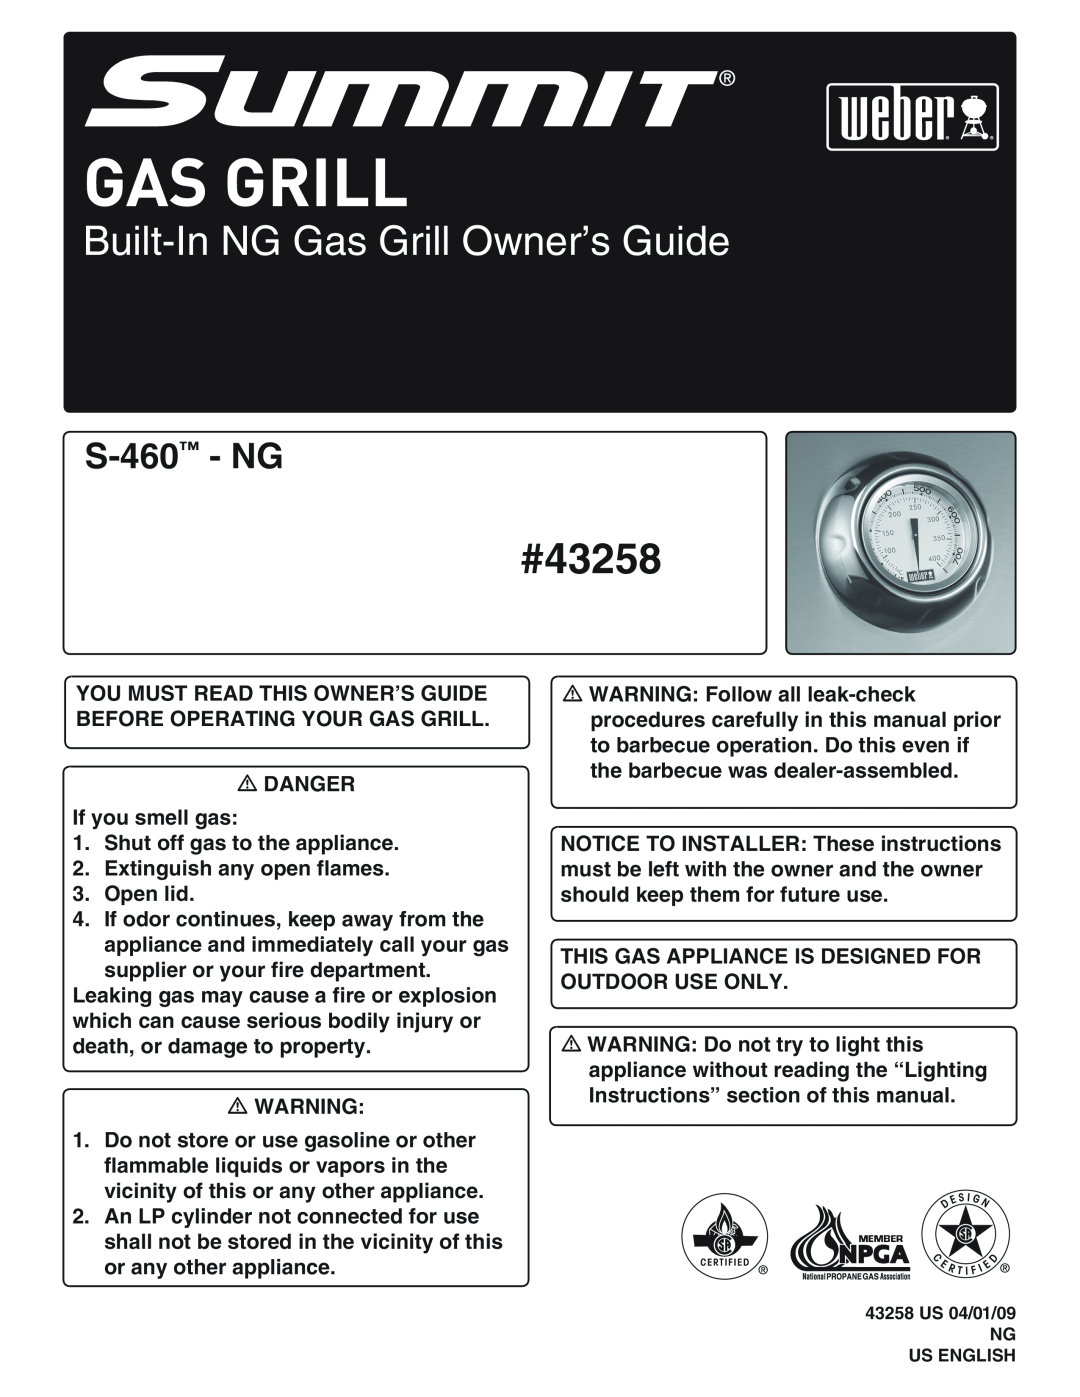 Weber manual #43255, Built-In LP Gas Grill Owner’s Guide, S-460 - LP 